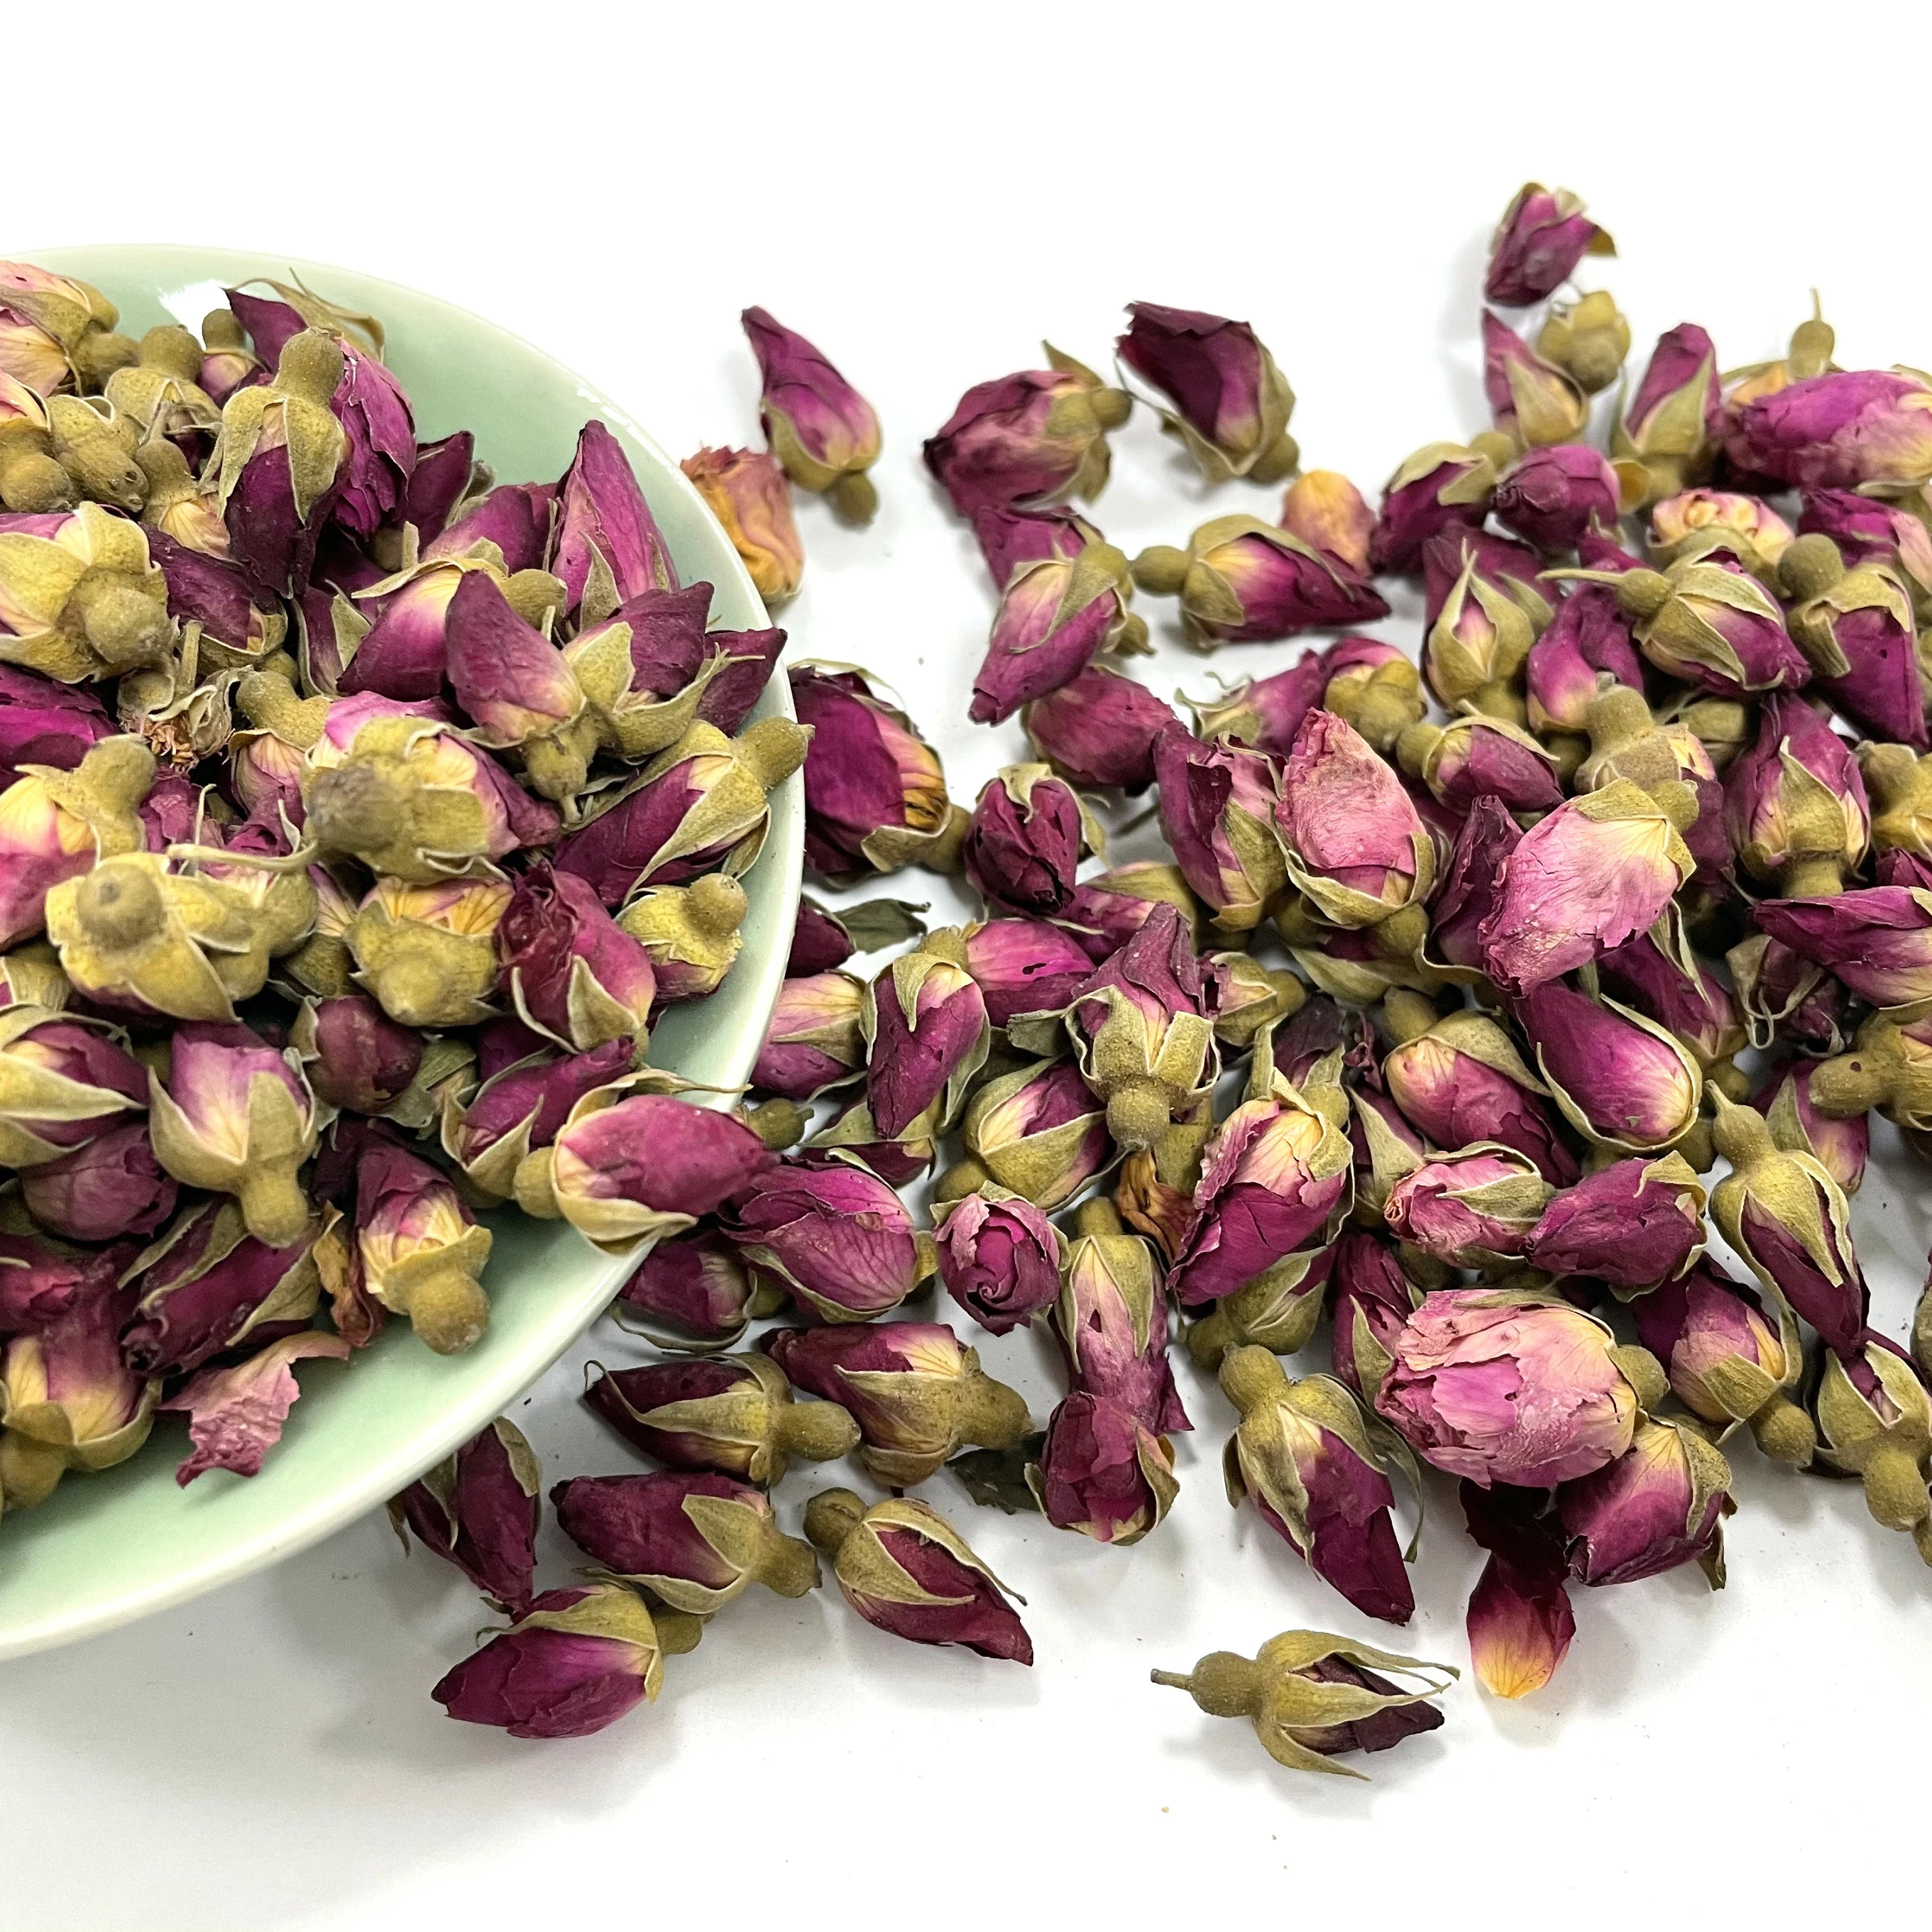 Rose Bud Factory Supply  Dried Rose Bud Natural Herbal Flower Tea For Health And Skin Care